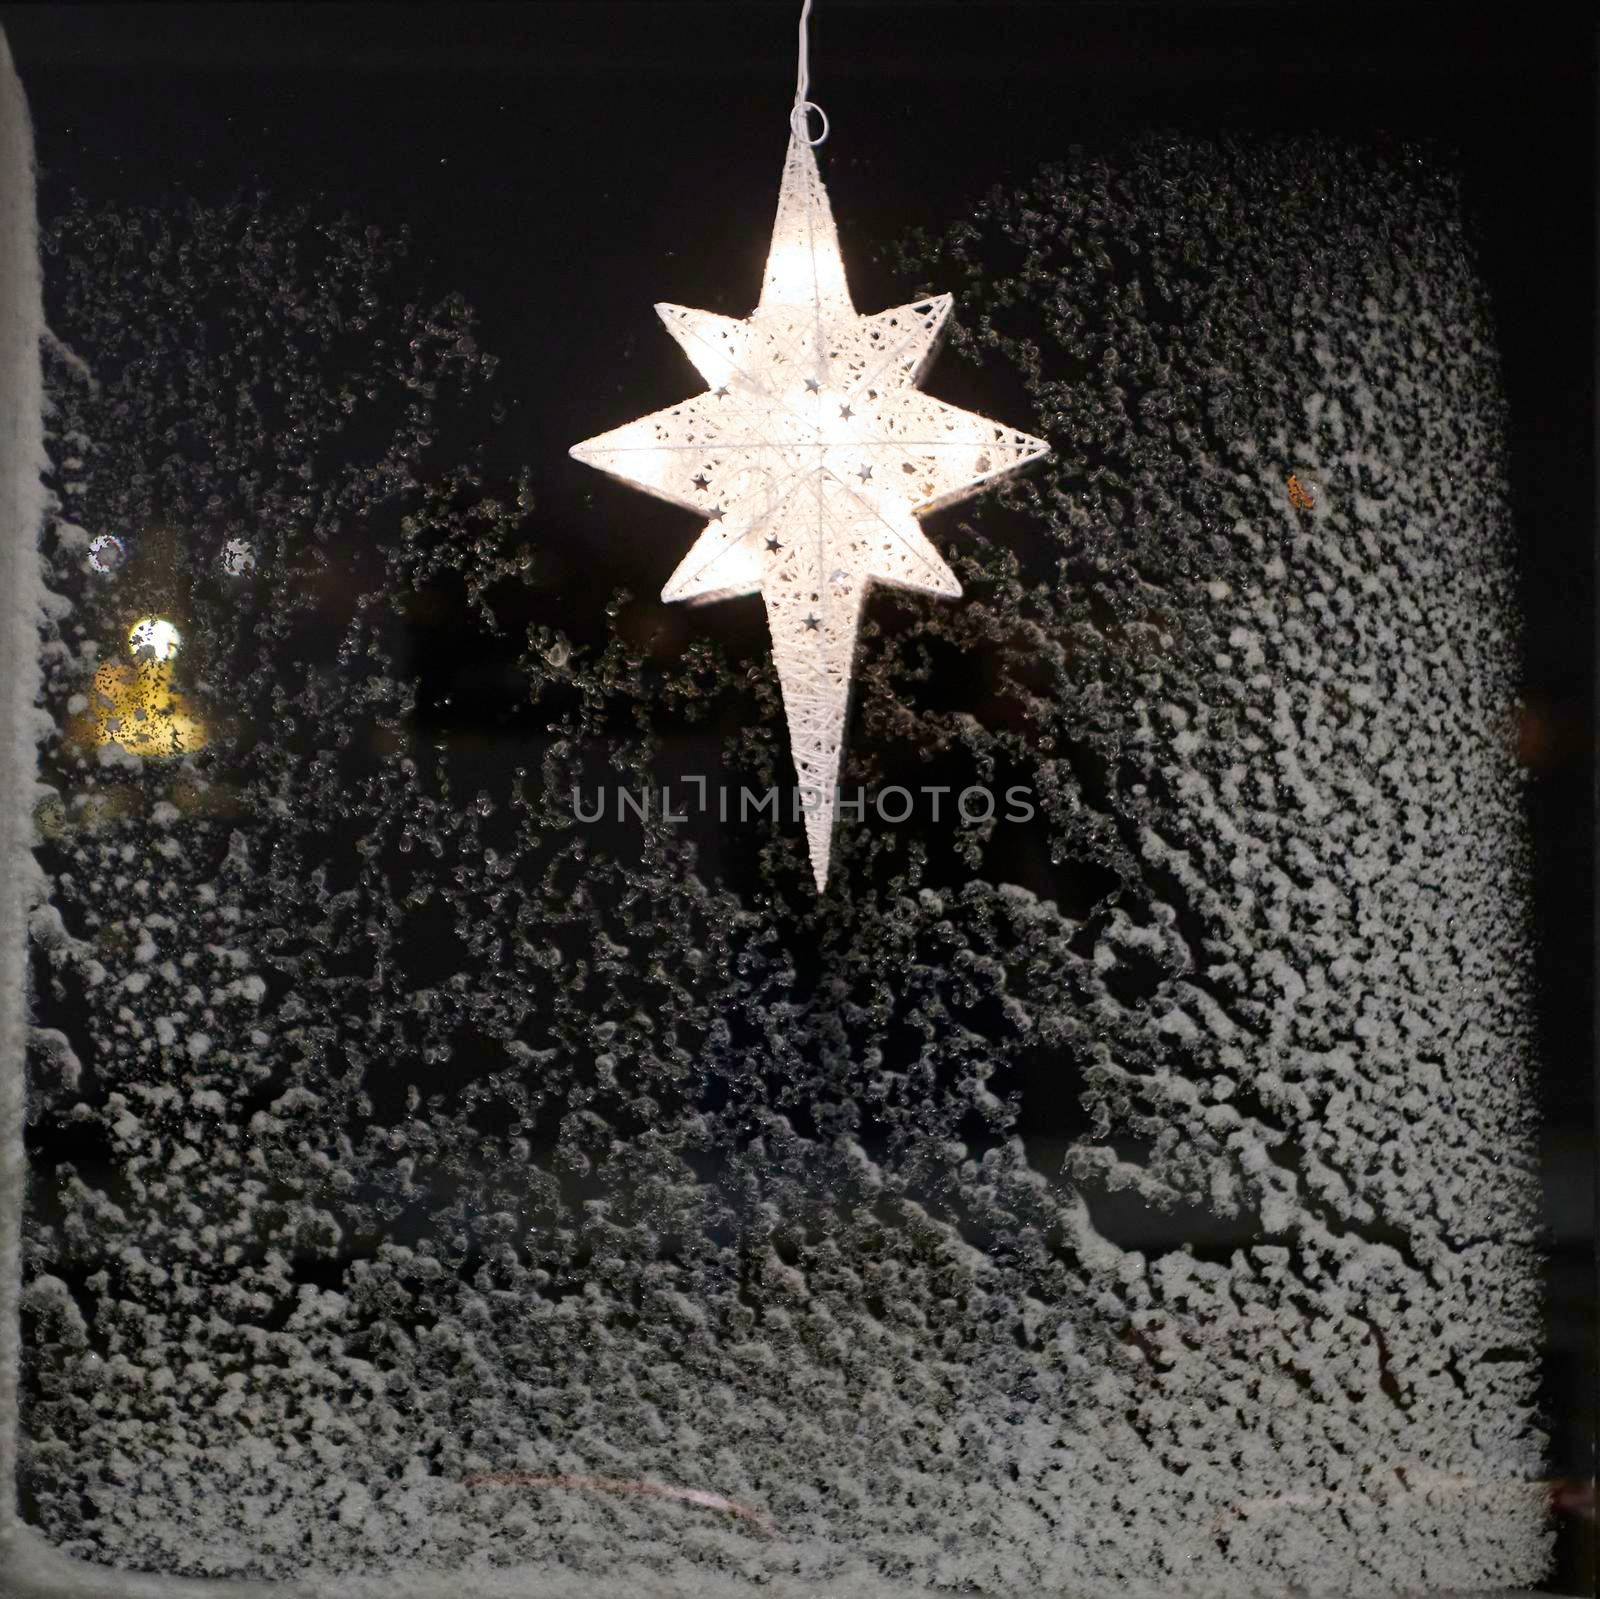 Typical star for lightning in the window and decoration during the winter time for Christmas in Scandinavia. The star is meant to represent the Star of Bethlehem,  birth of JesusA Christmas star in the window. Warm light, Christmas, cosy atmosphere. Advent time.